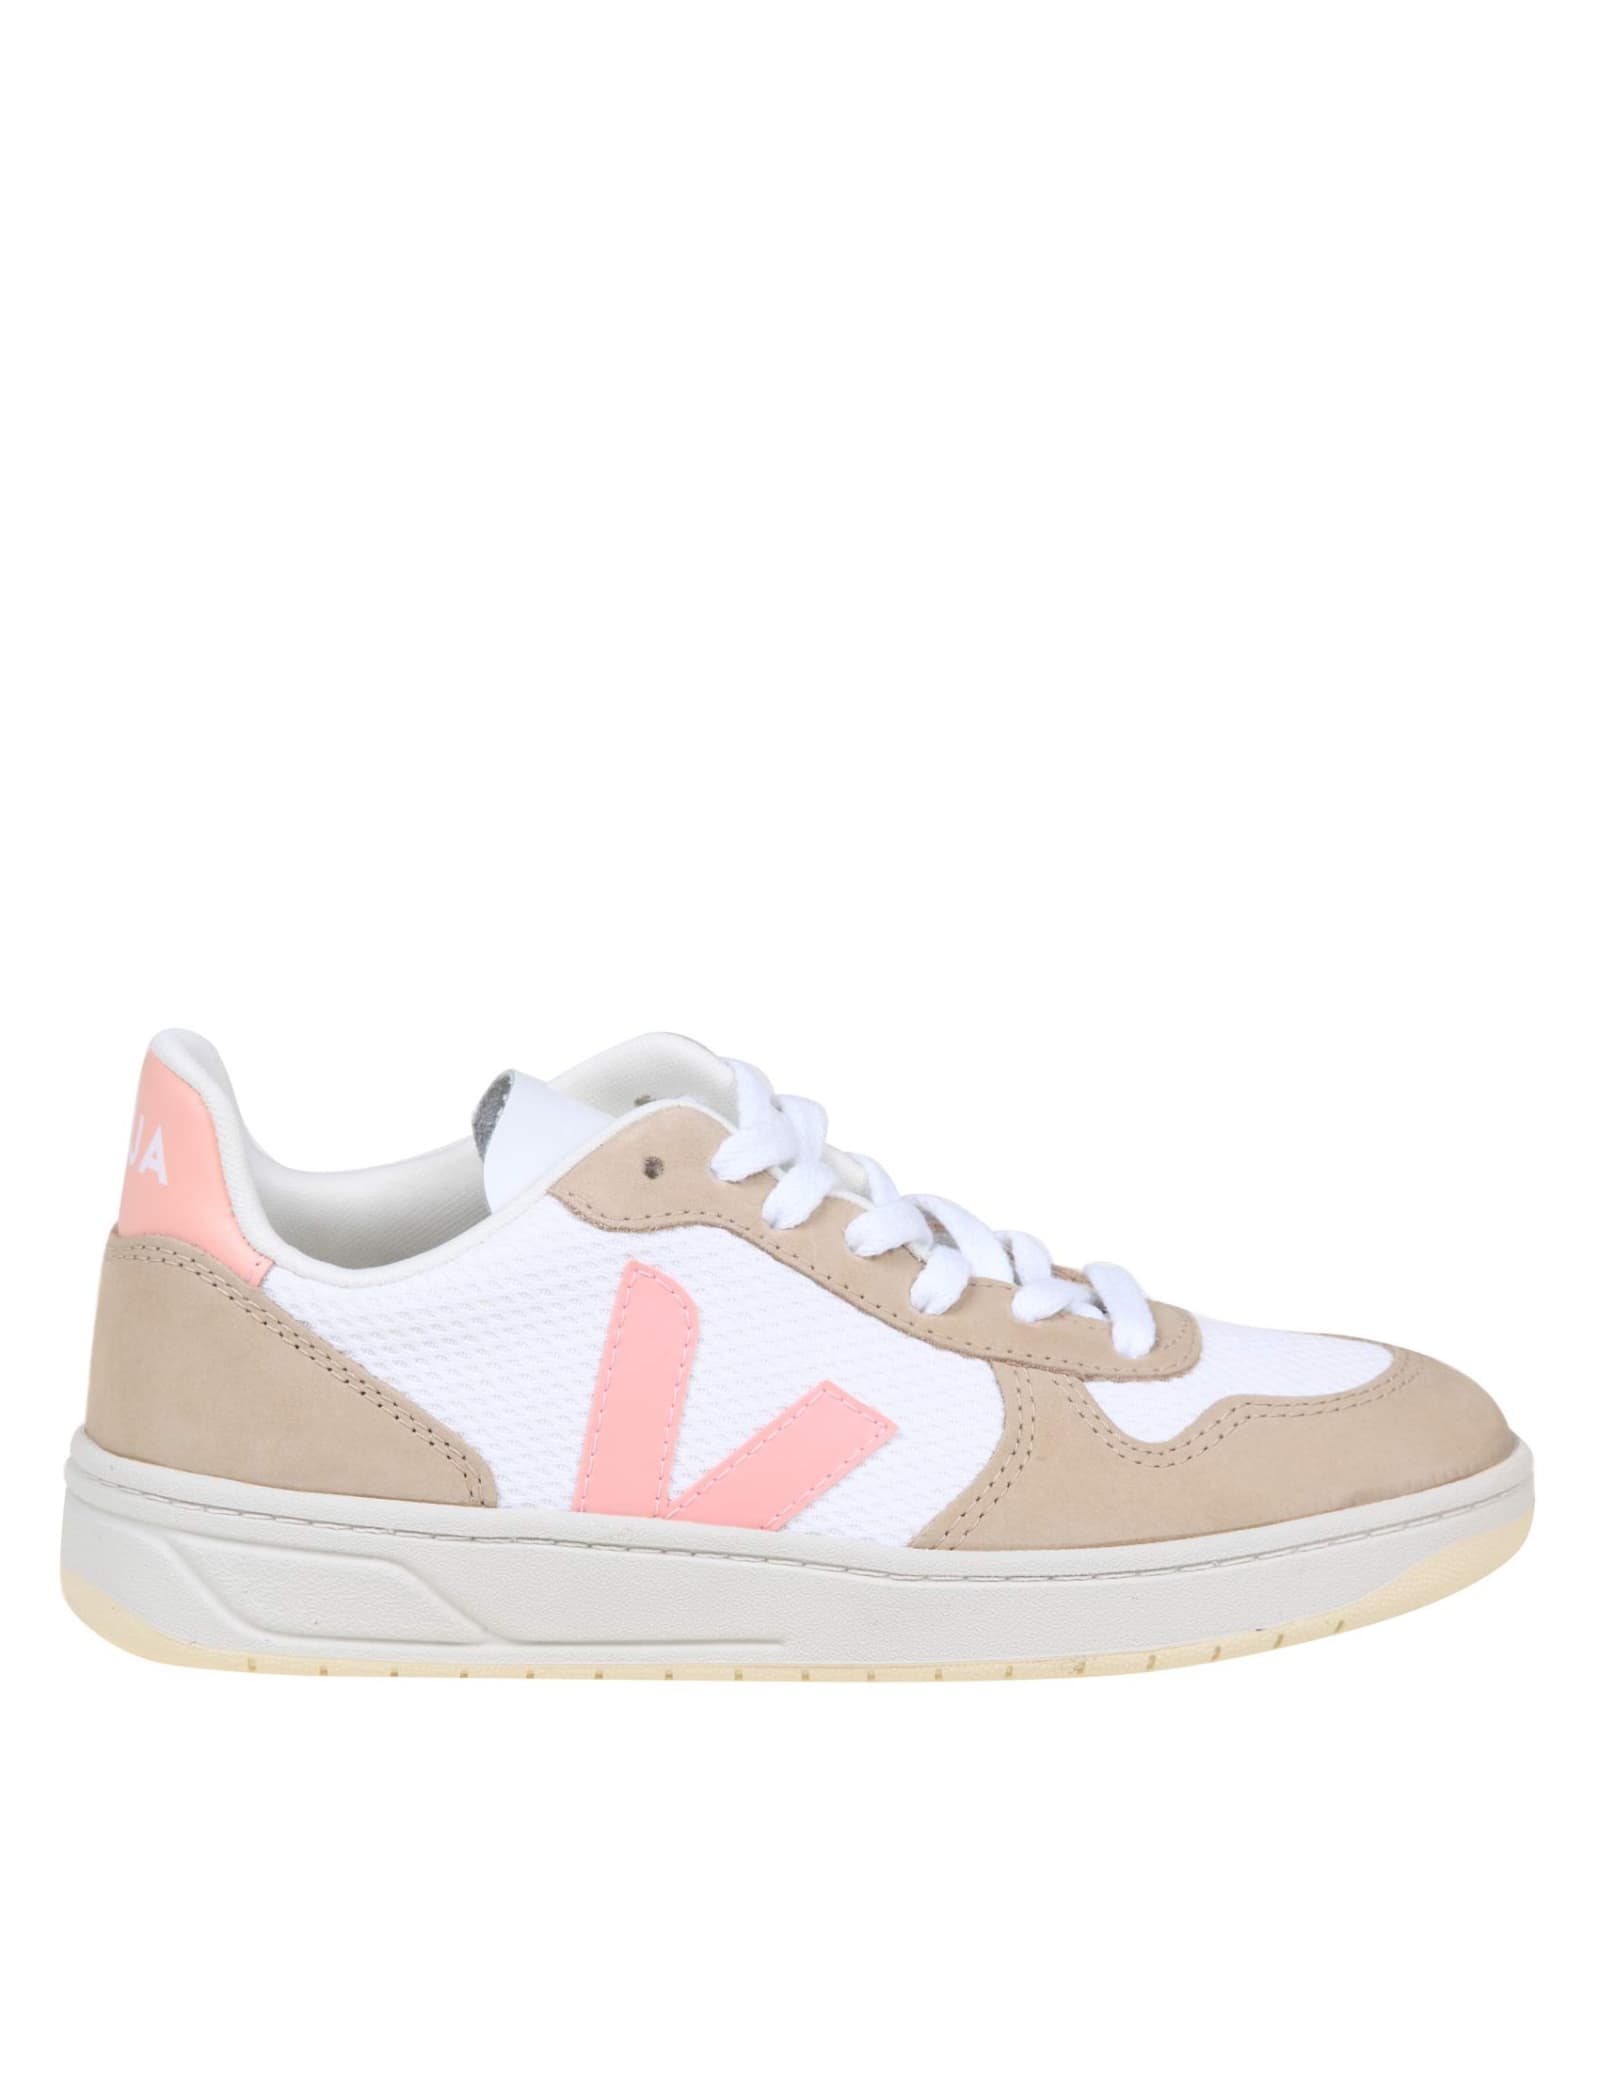 Veja Sneakers In Fabric And Suede Color White / Almond